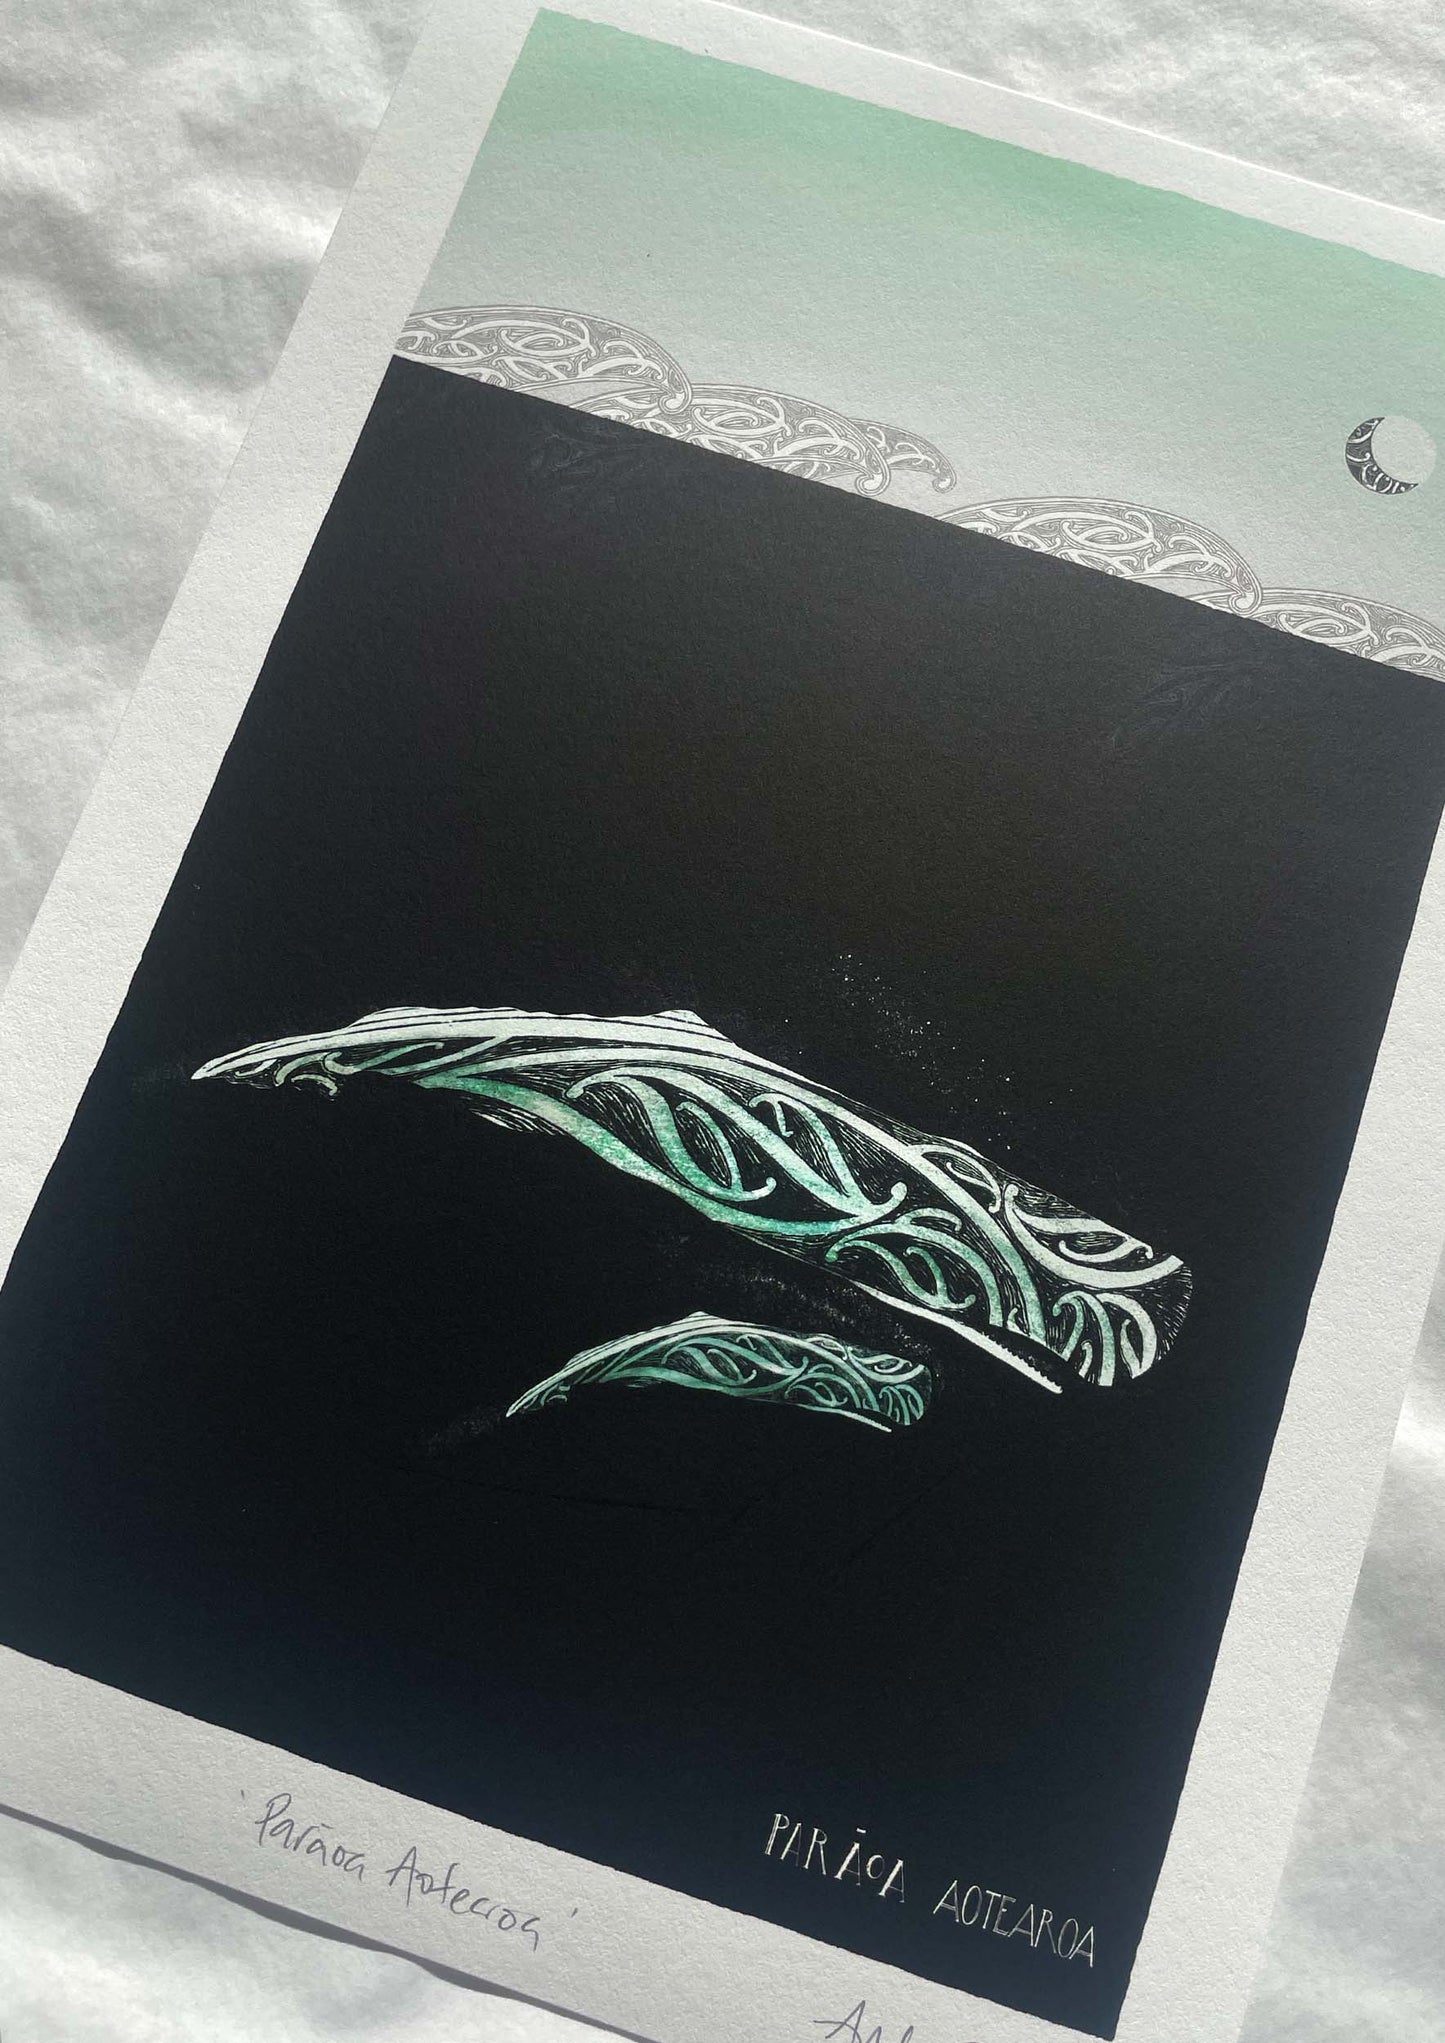 Parāoa whale print with maori art design sperm whale and calf with te reo maori. Limited edition nz art print by Amber Smith